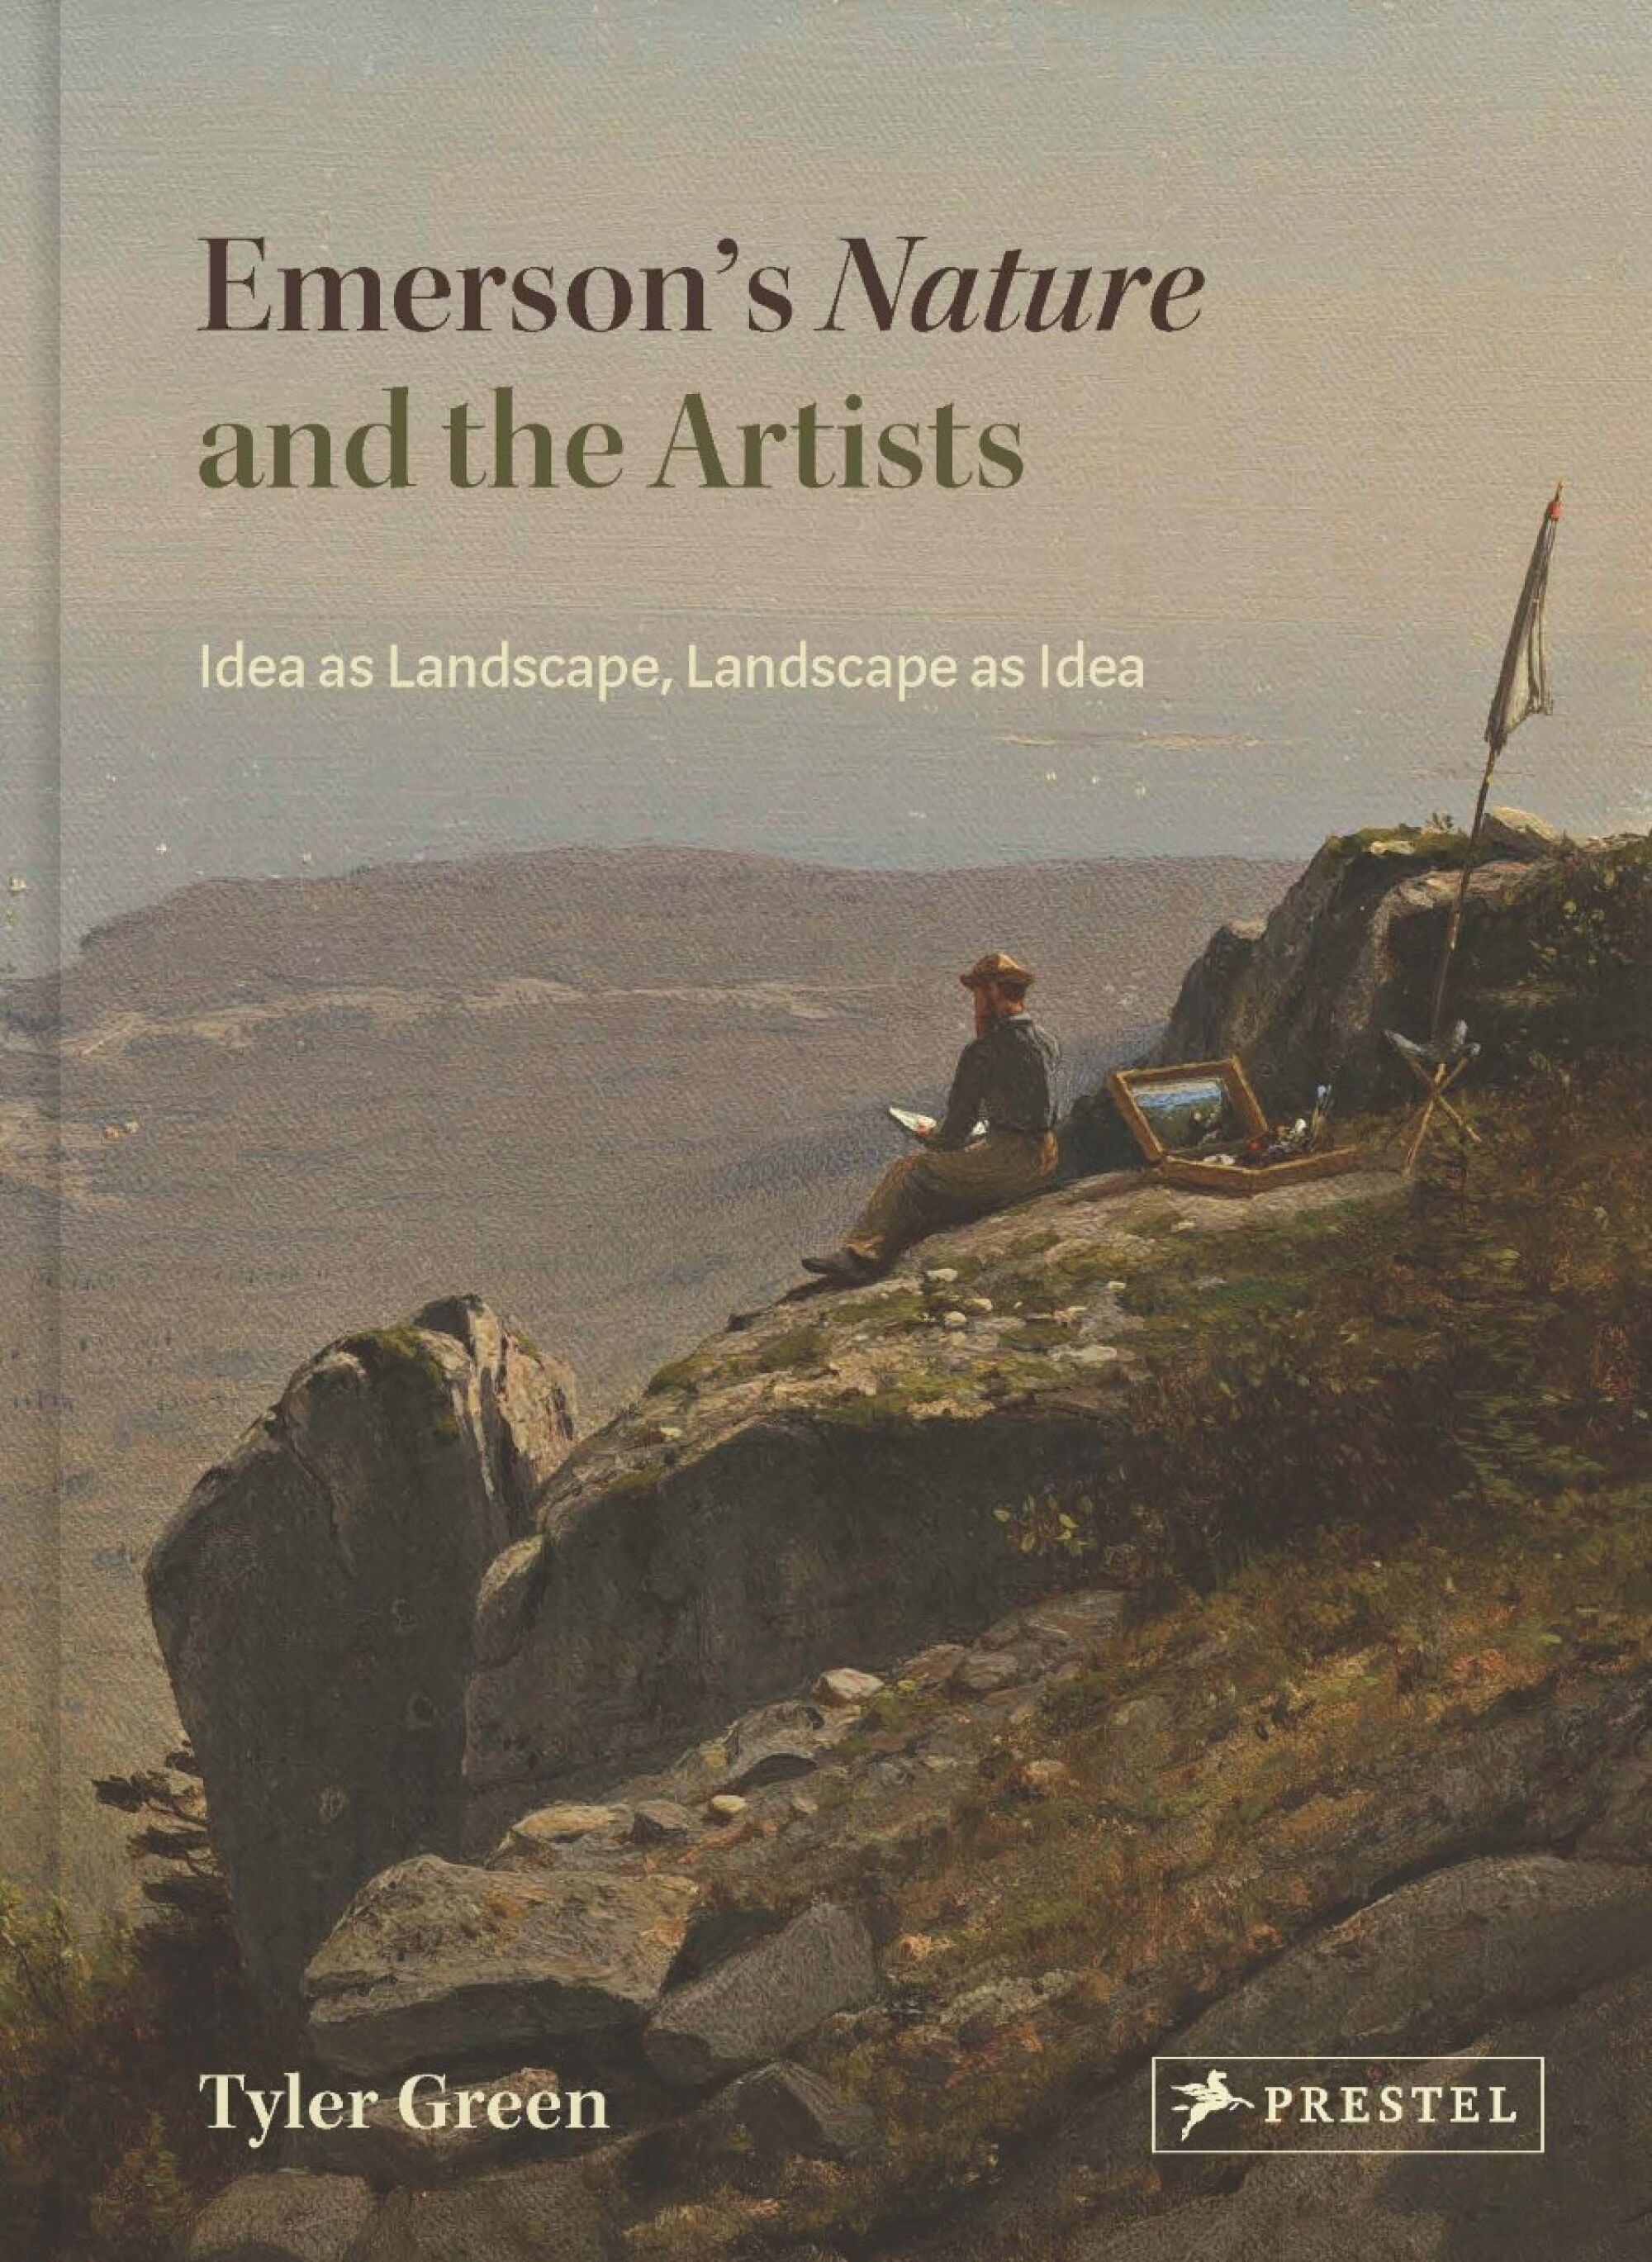 A book cover of a man sitting on a cliff